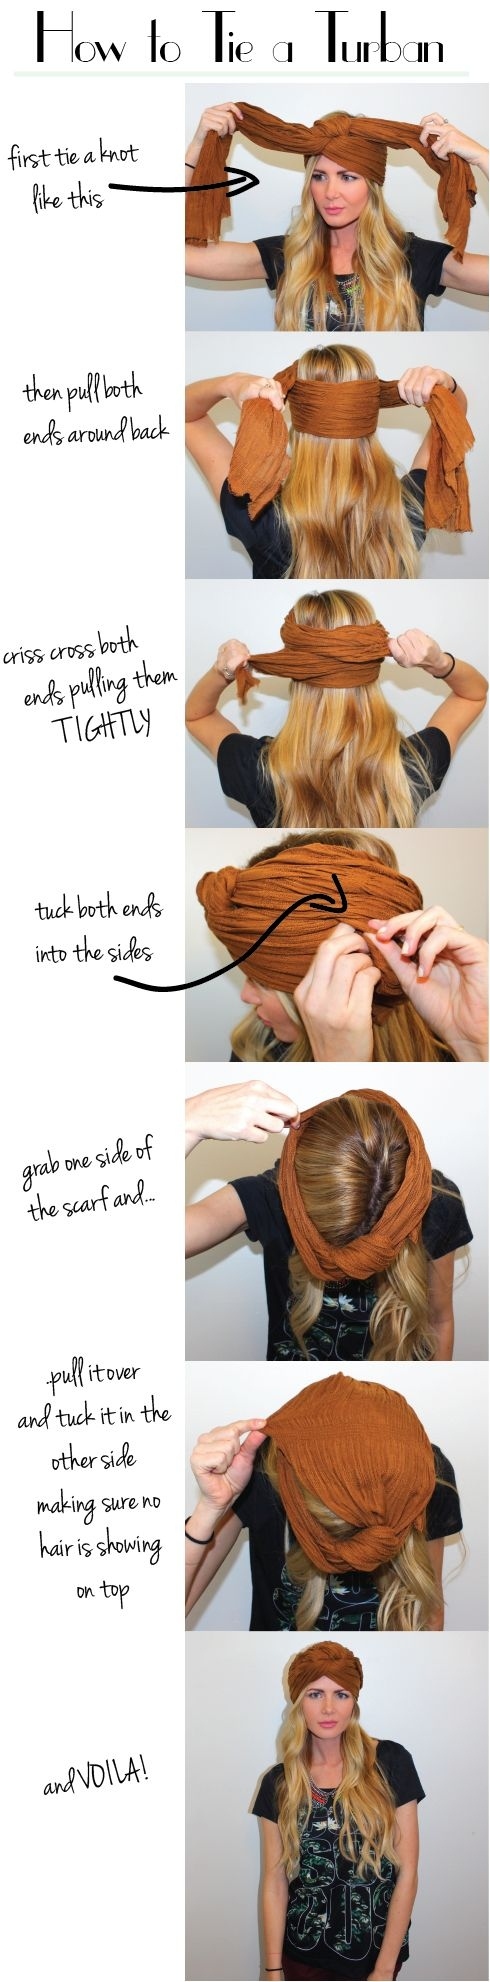 27. Cover a bad hair day with a turban